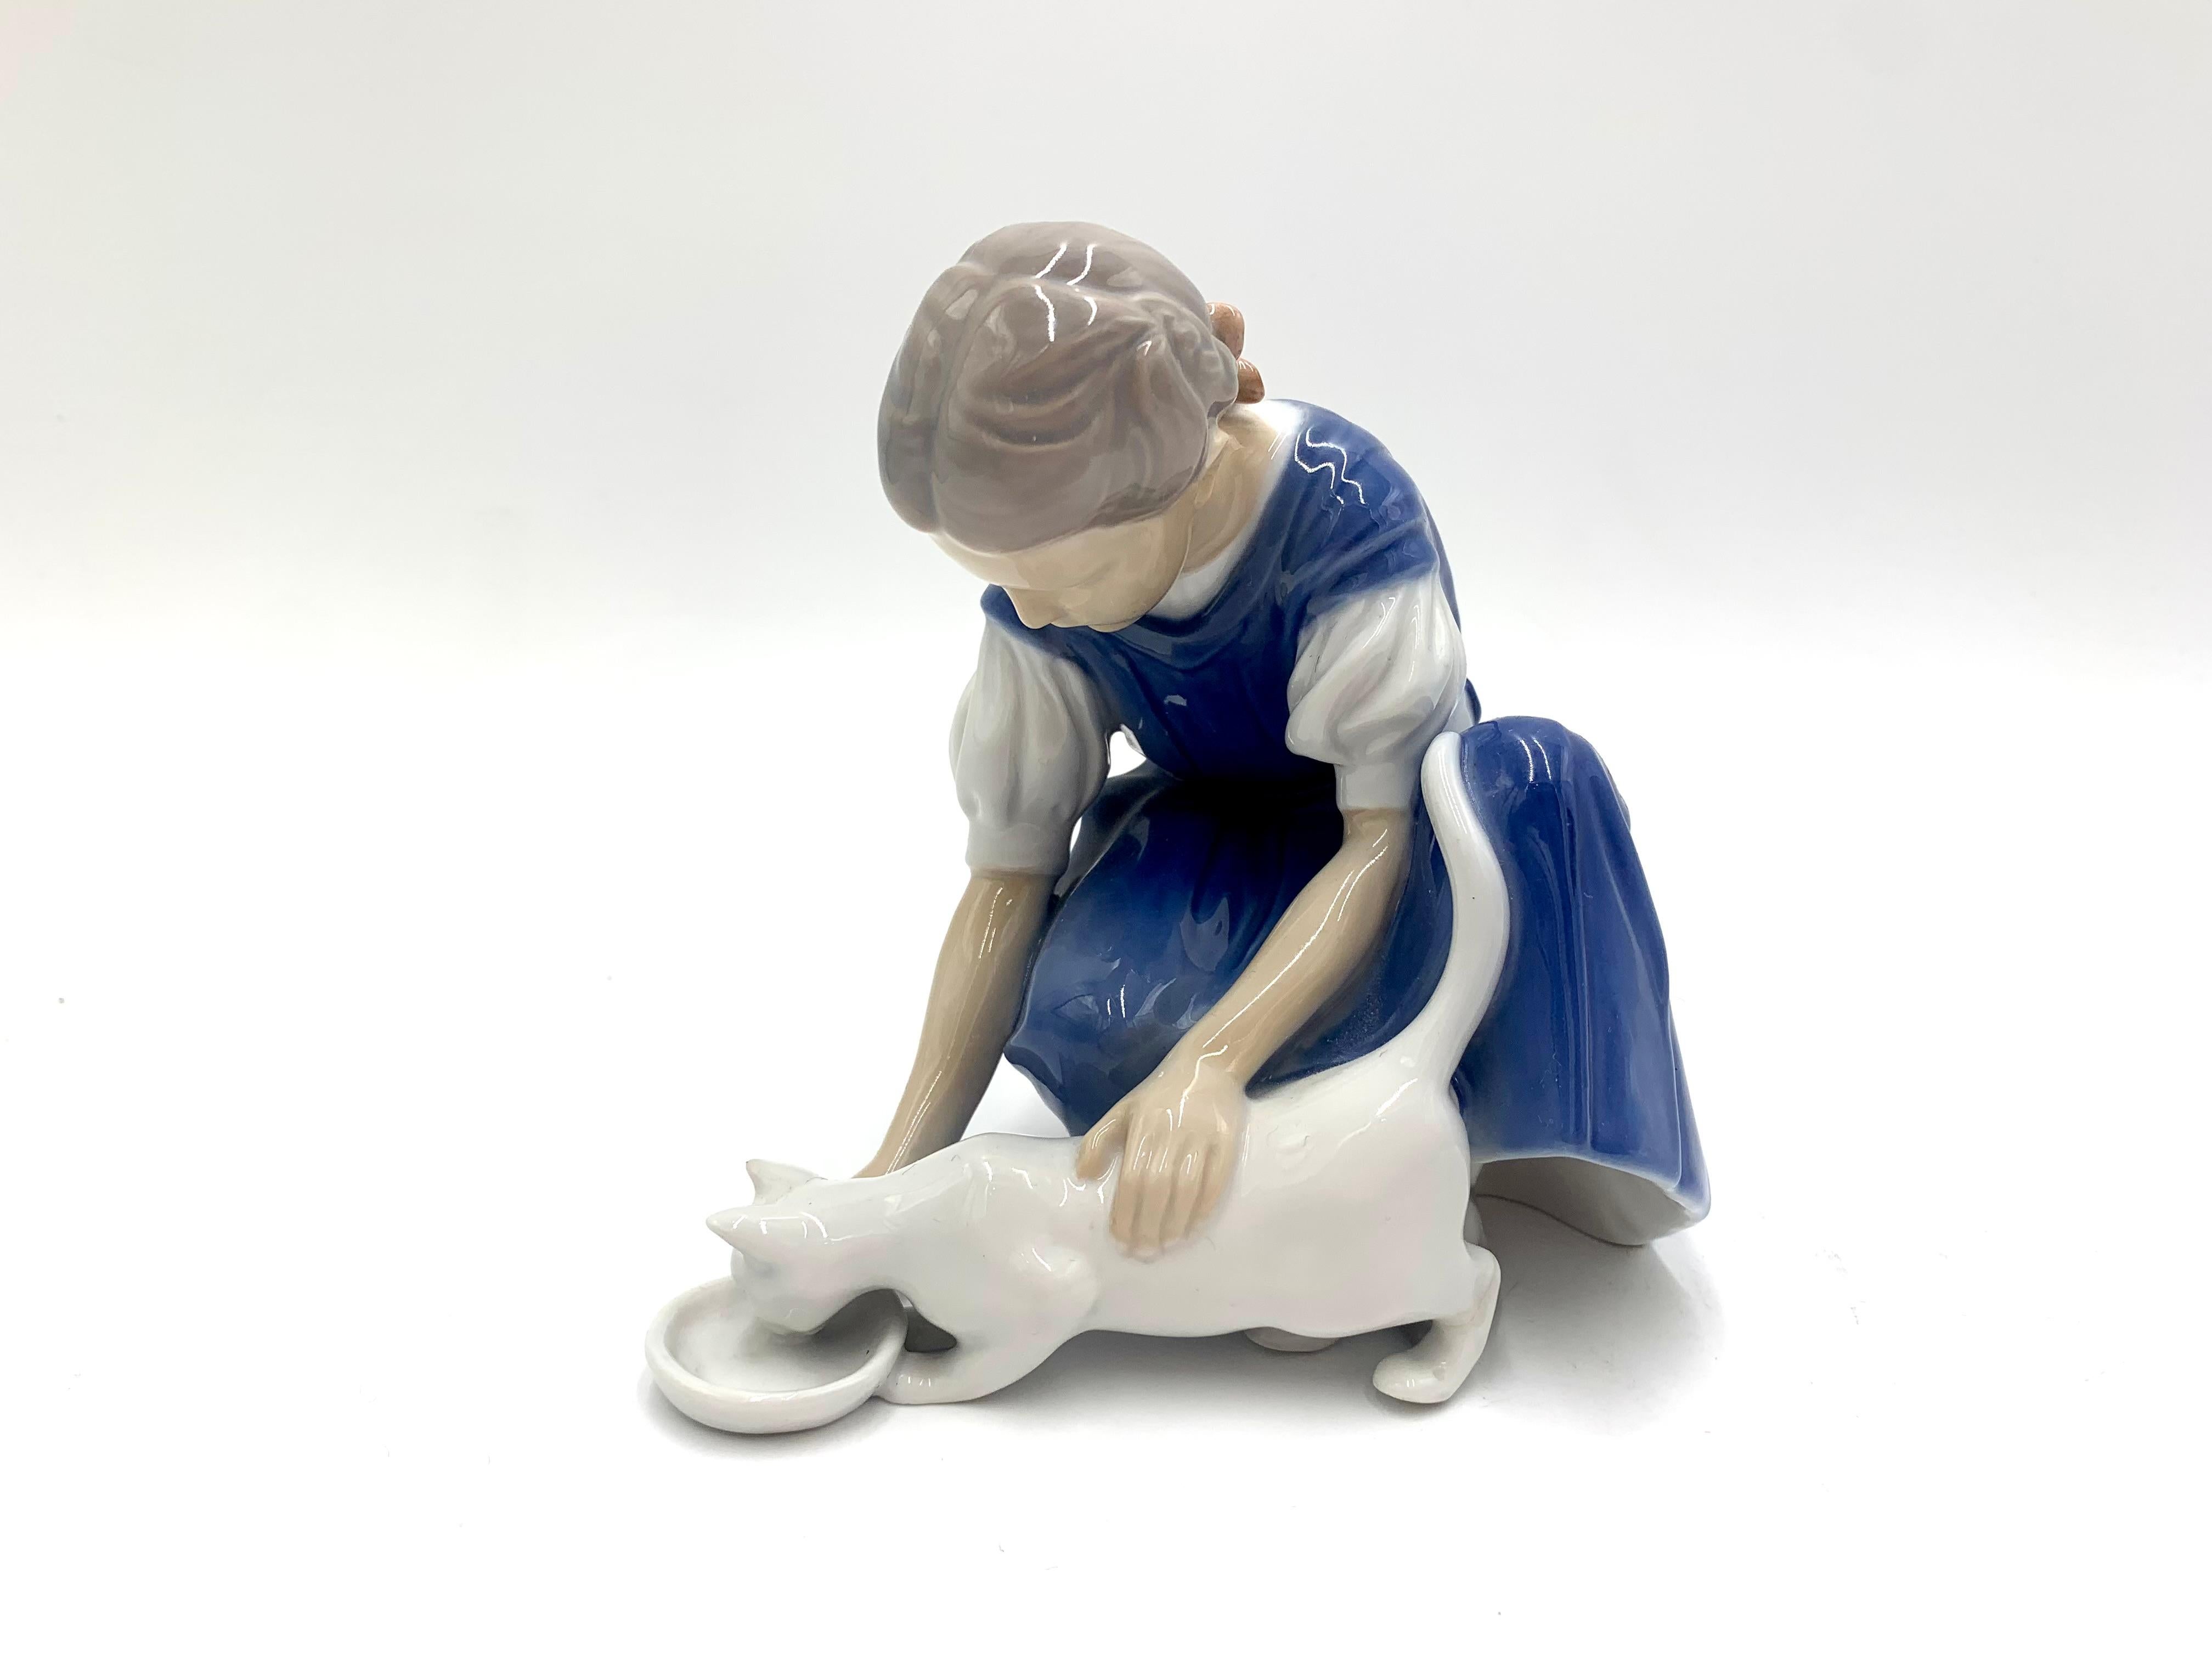 20th Century Porcelain Figurine of a Girl with a Cat, Bing & Grondahl, Denmark, 1950s / 1960s